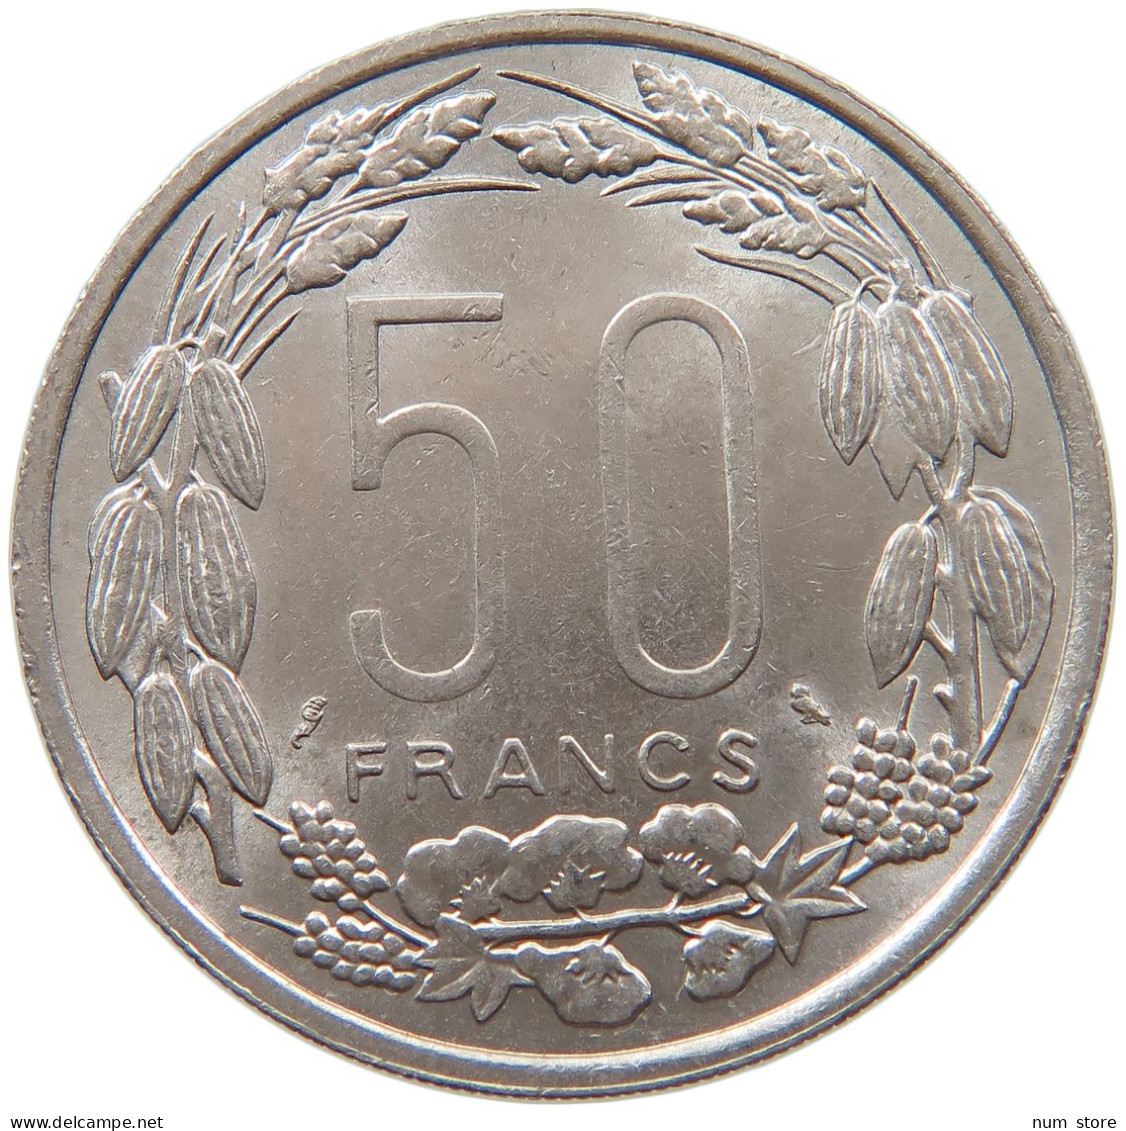 CENTRAL AFRICAN STATES 50 FRANCS 1961  #t162 0541 - Repubblica Centroafricana